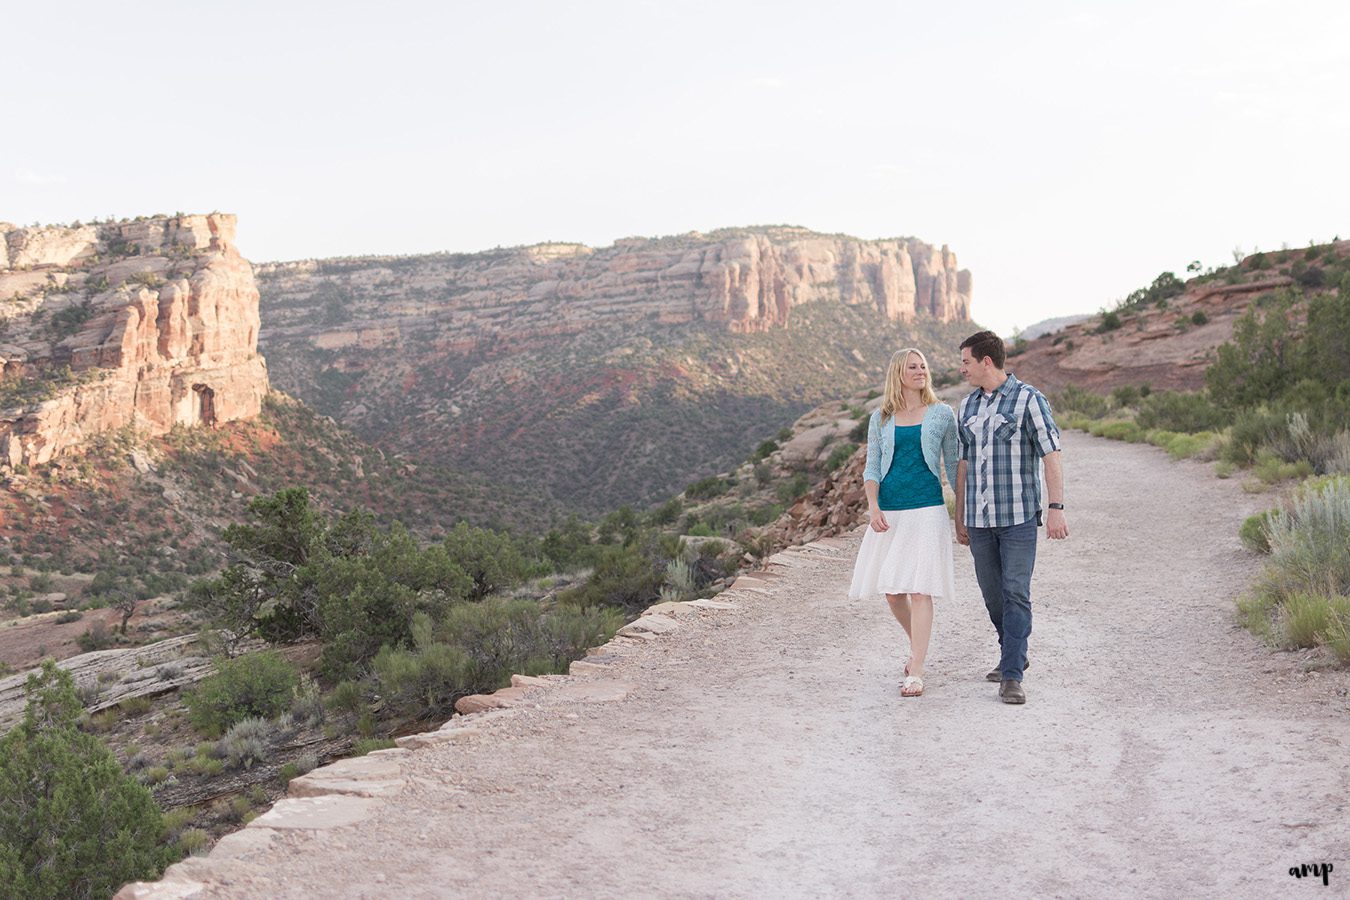 Couple walking hand-in-hand in the desert of the Colorado National Monument